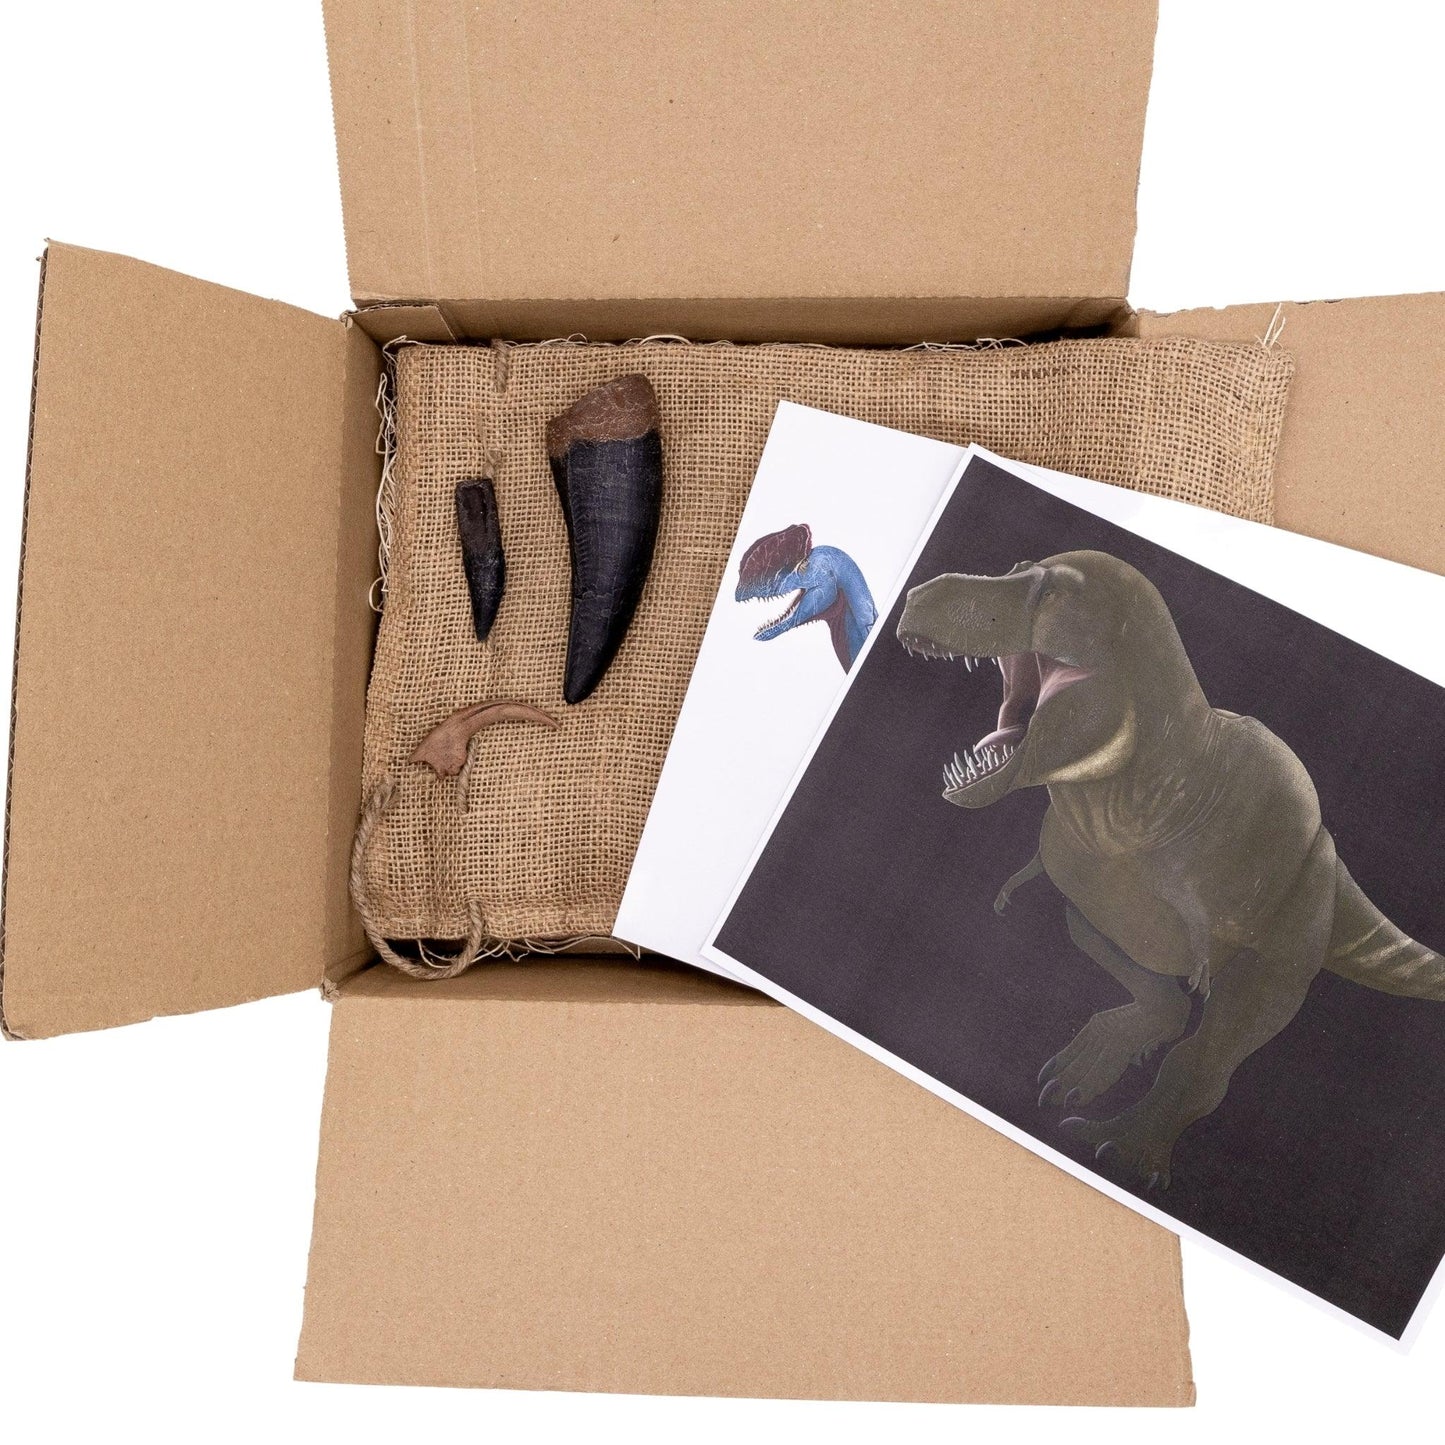 Dinosaurs in the Movies Crate - Fossil Crates Dinosaur teeth and claw casts